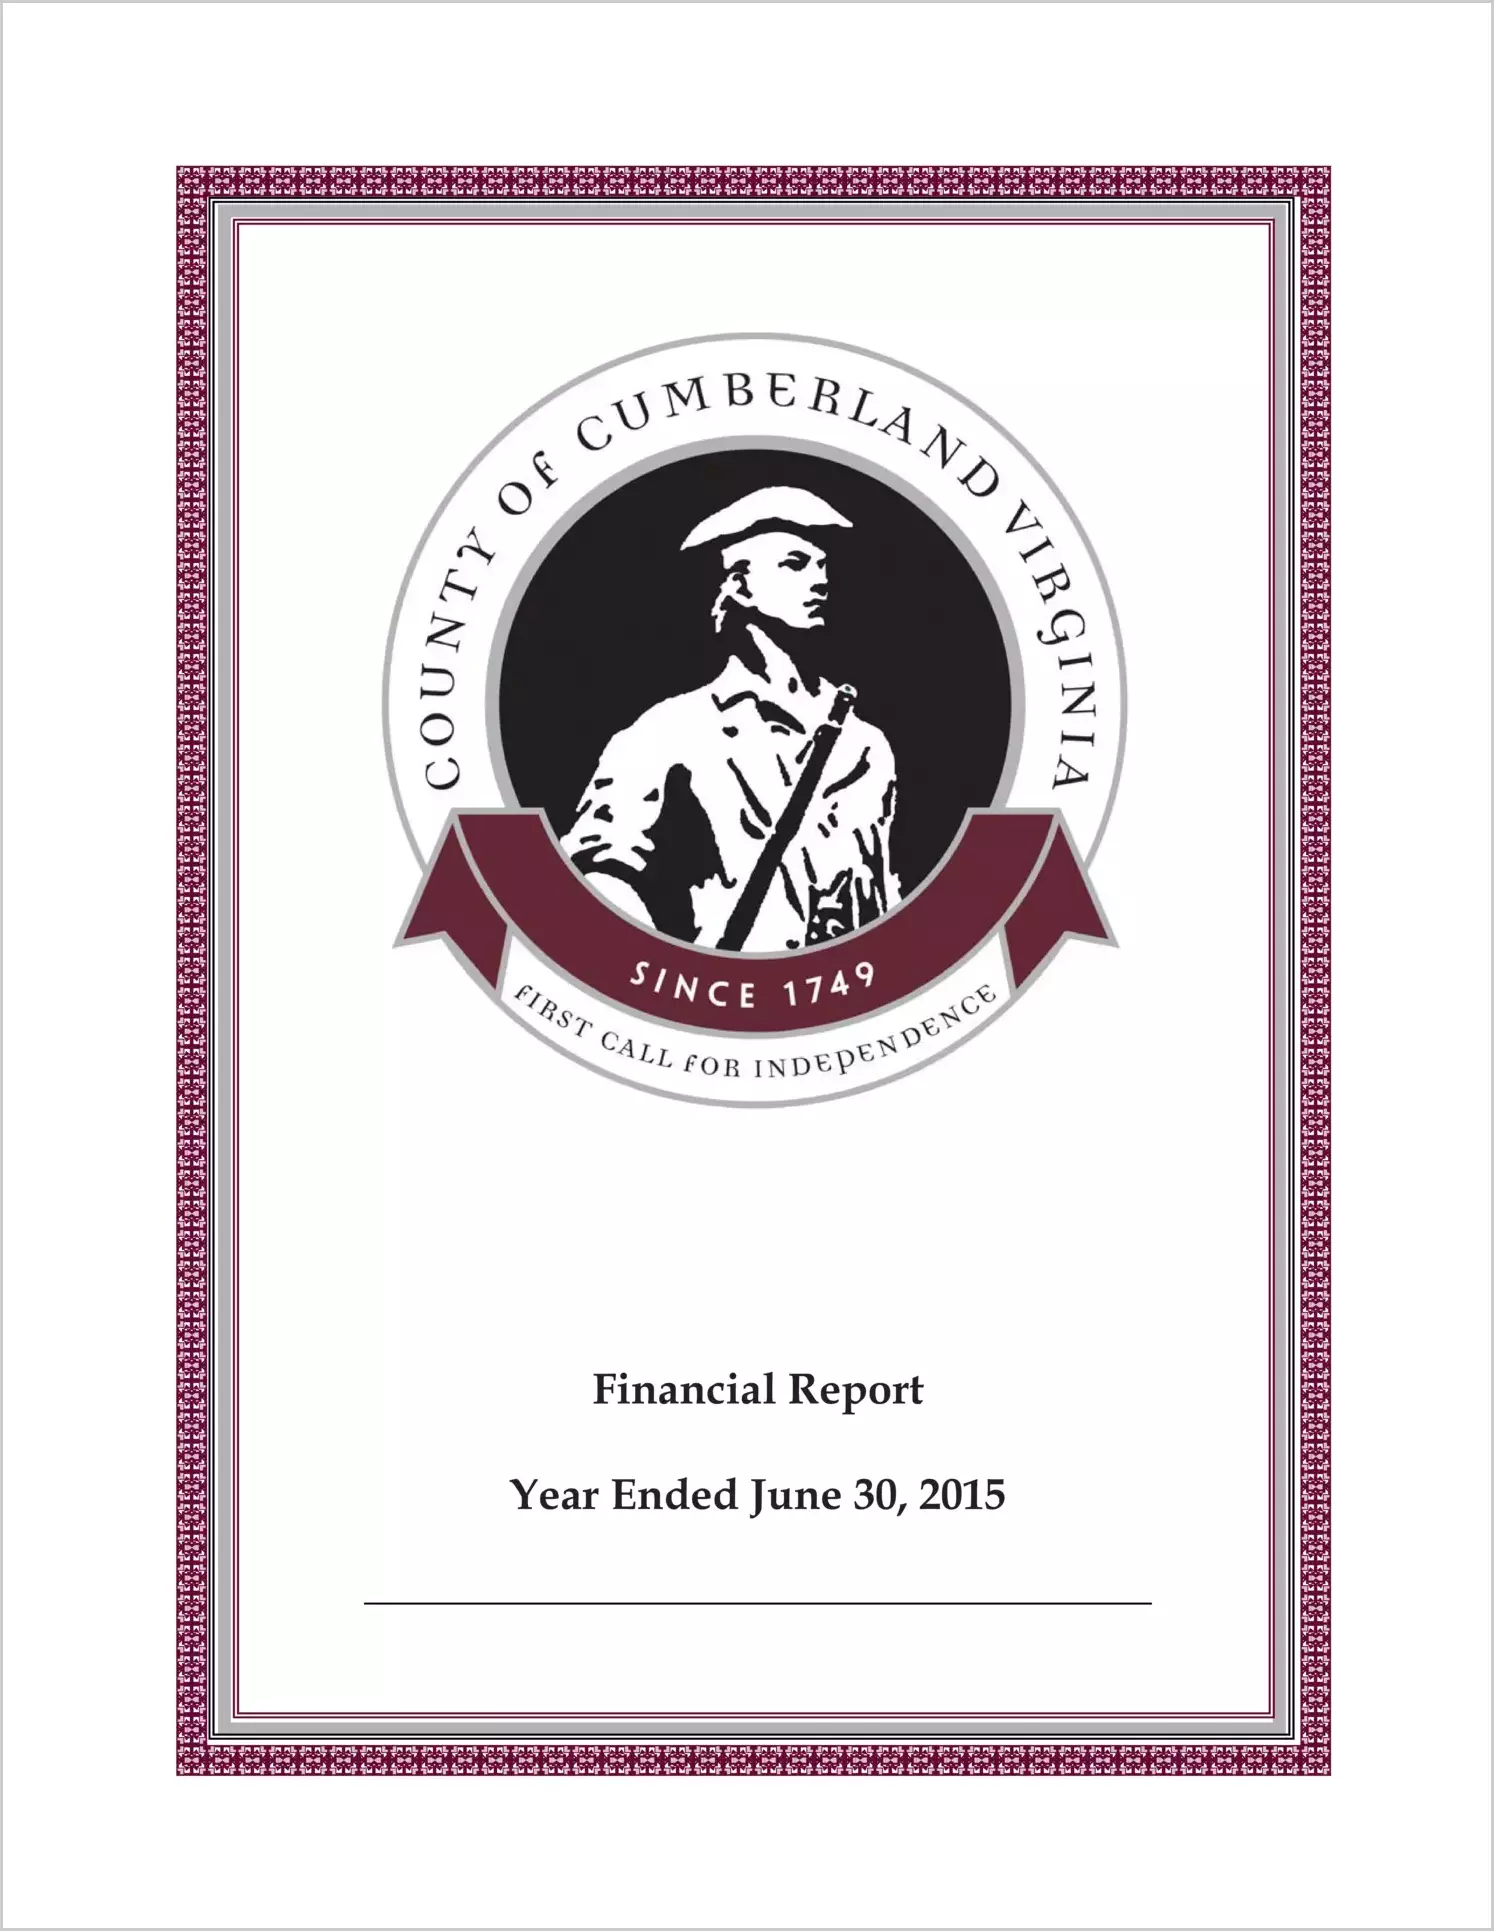 2015 Annual Financial Report for County of Cumberland